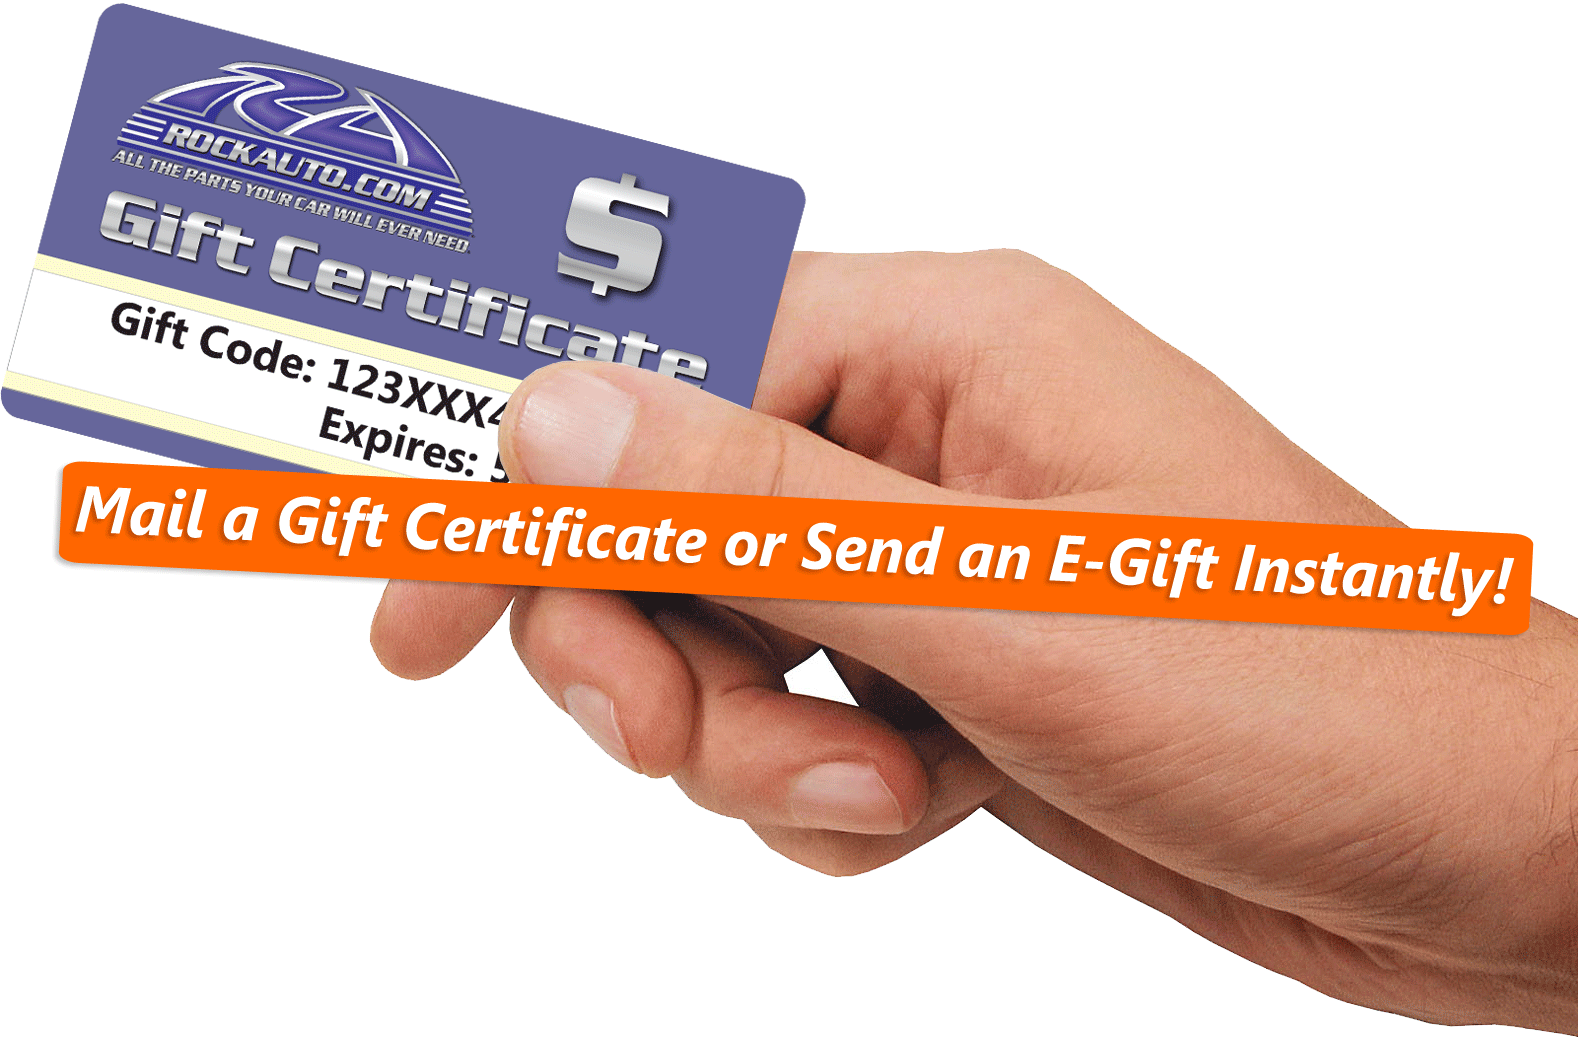 Make your gift giving easy with a RockAuto Gift Certificate